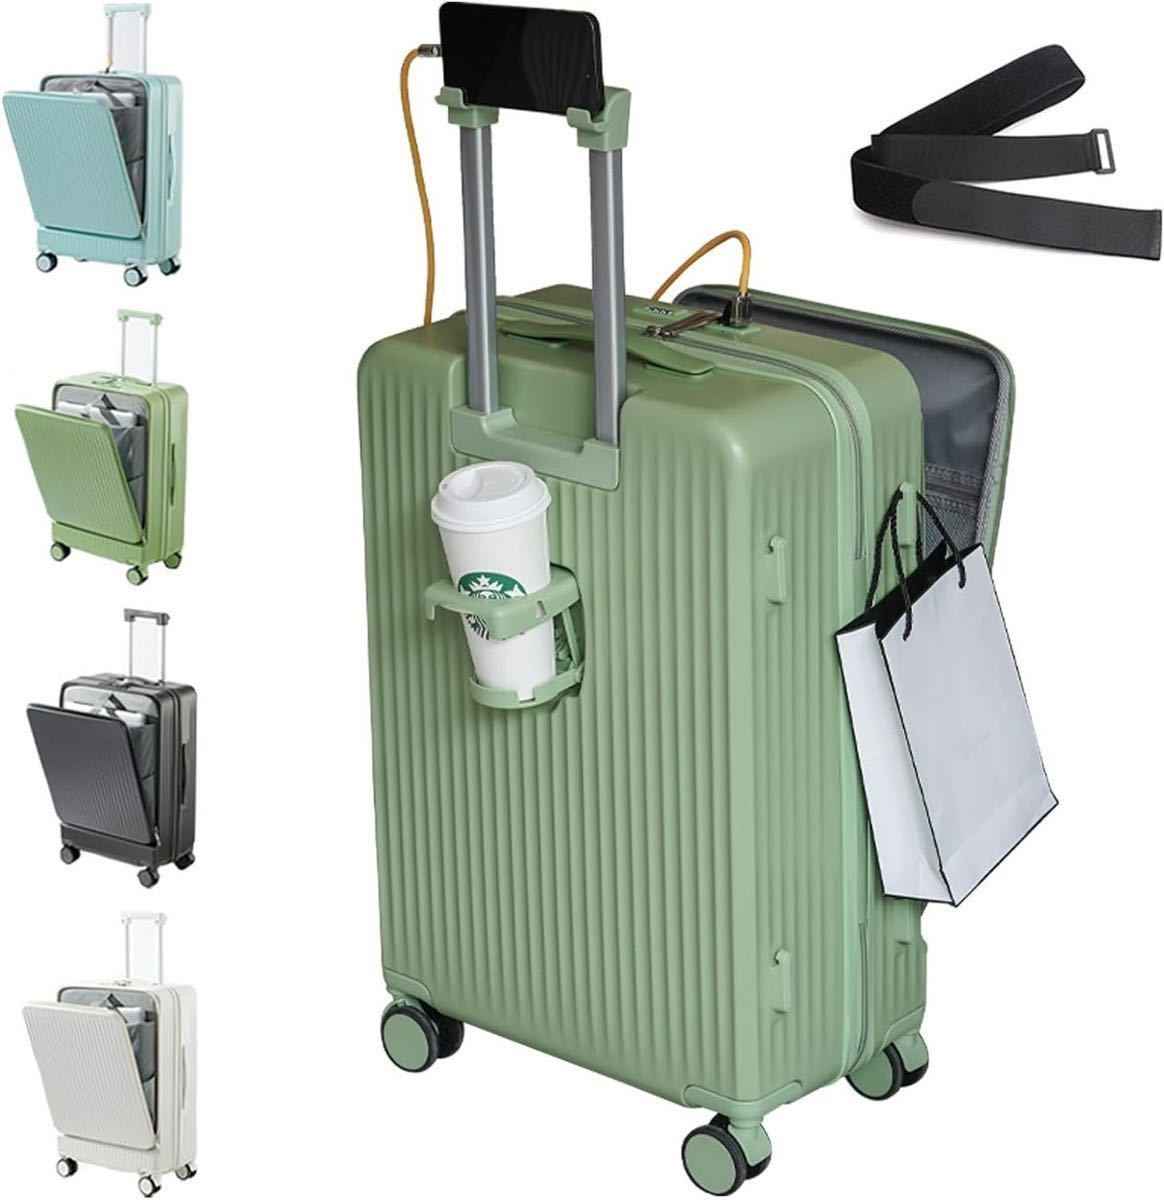  suitcase front open machine inside bringing in Carry case carry bag green S